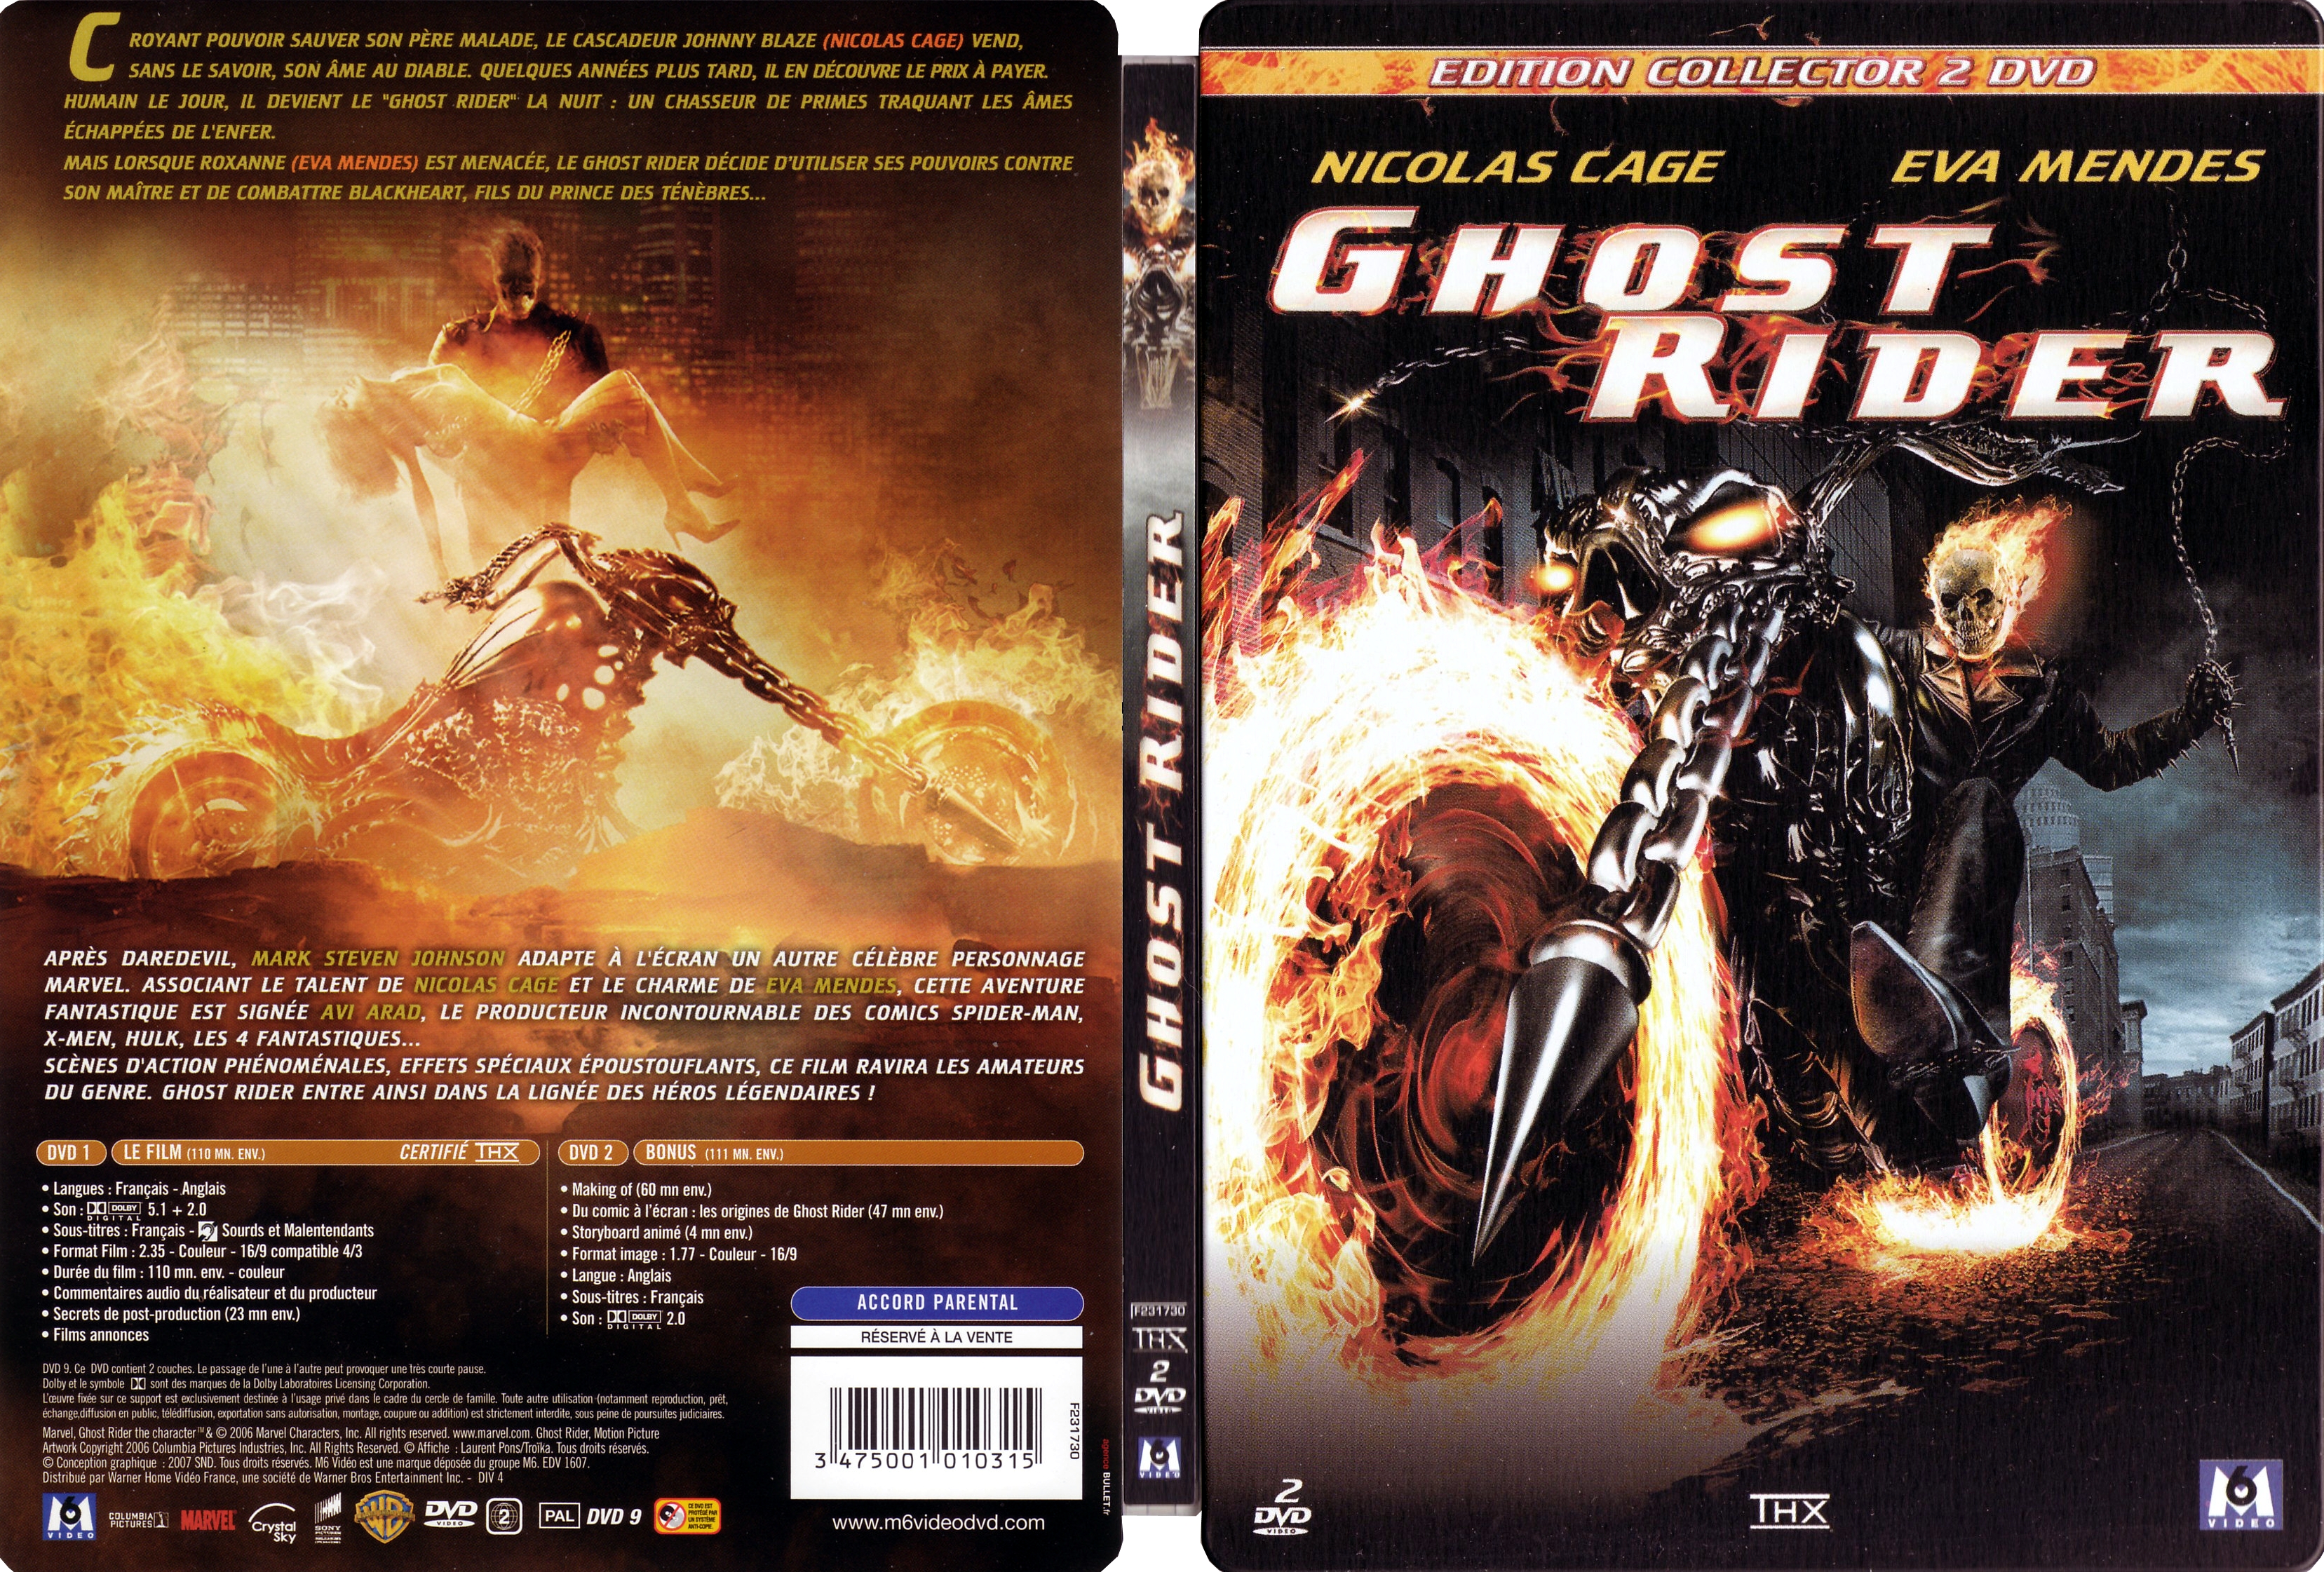 Jaquette DVD Ghost rider v3